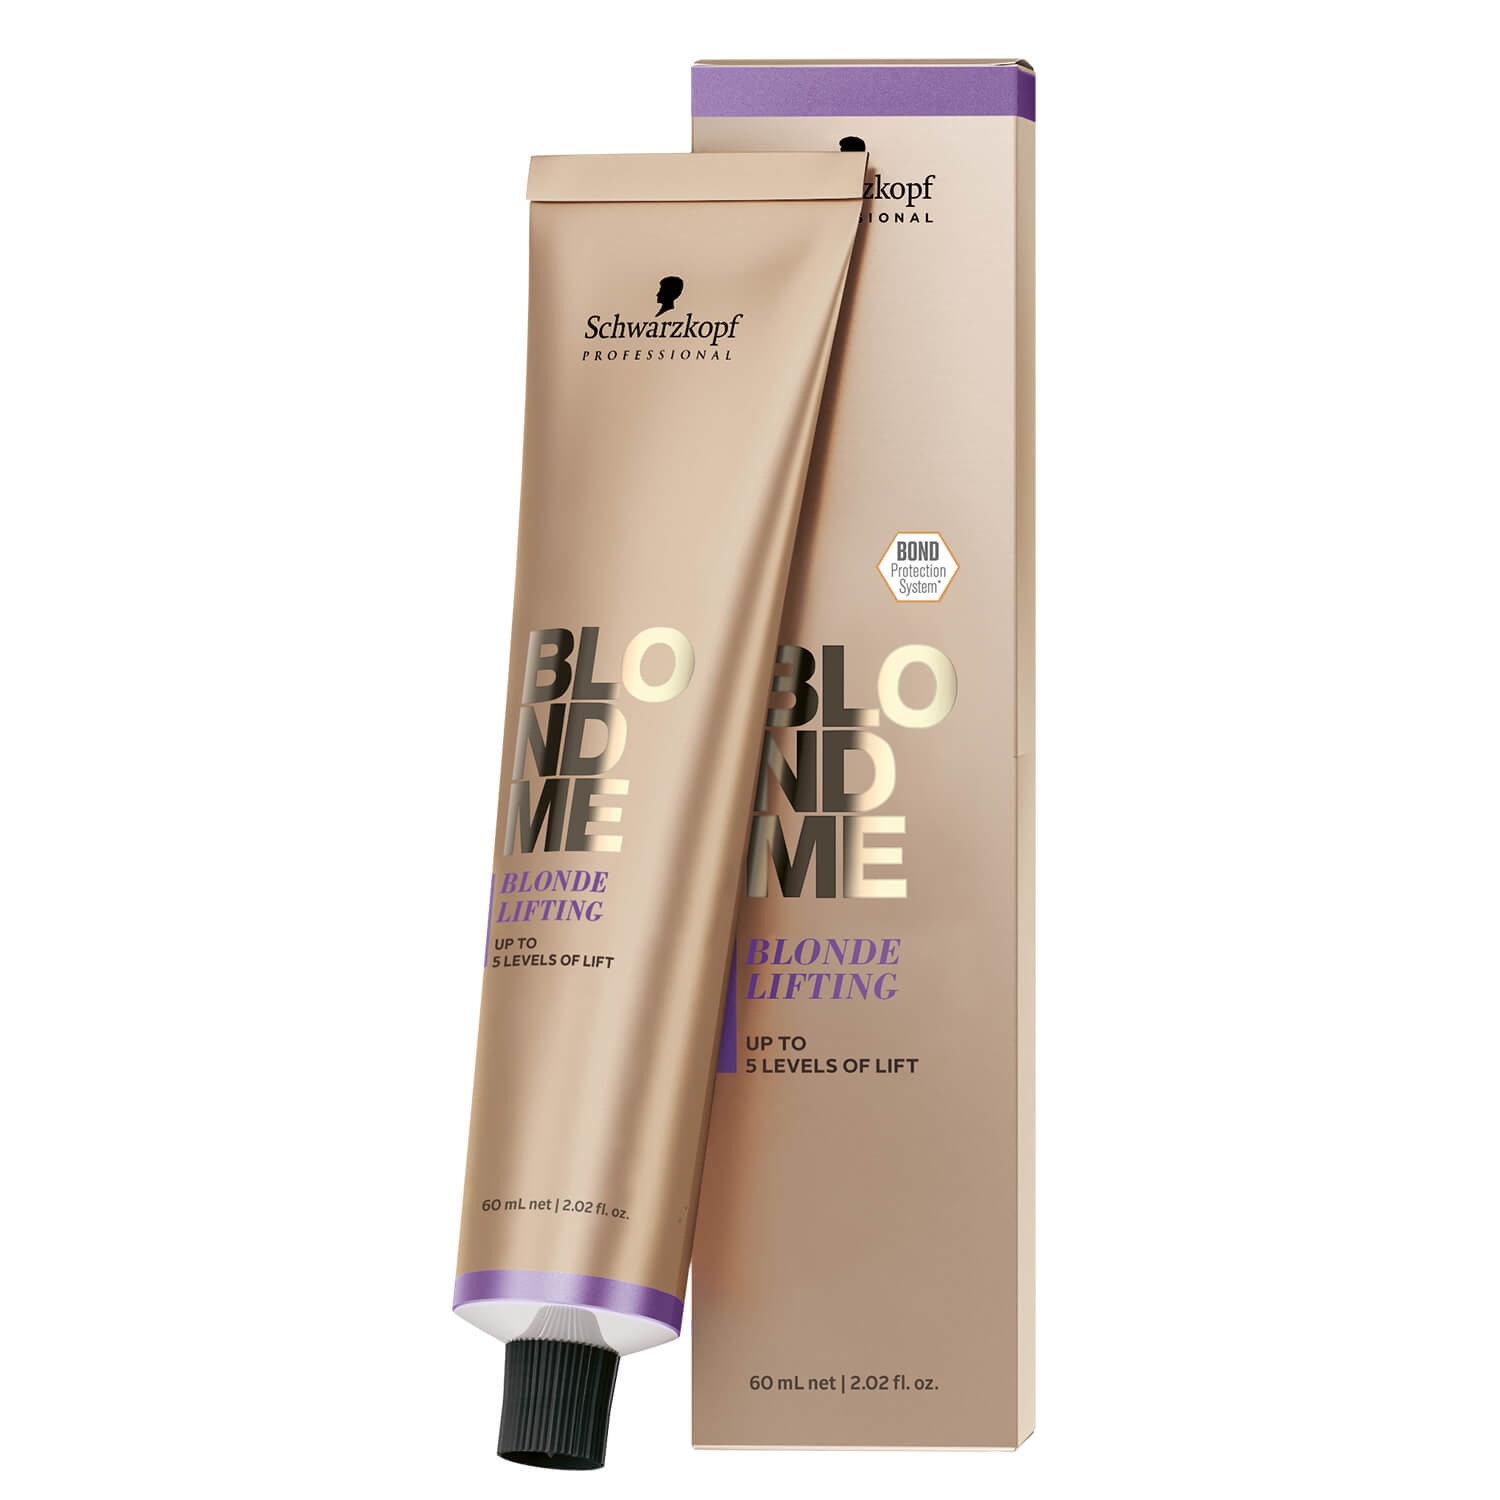 Product image from Blondme - Blonde Lifting Ash